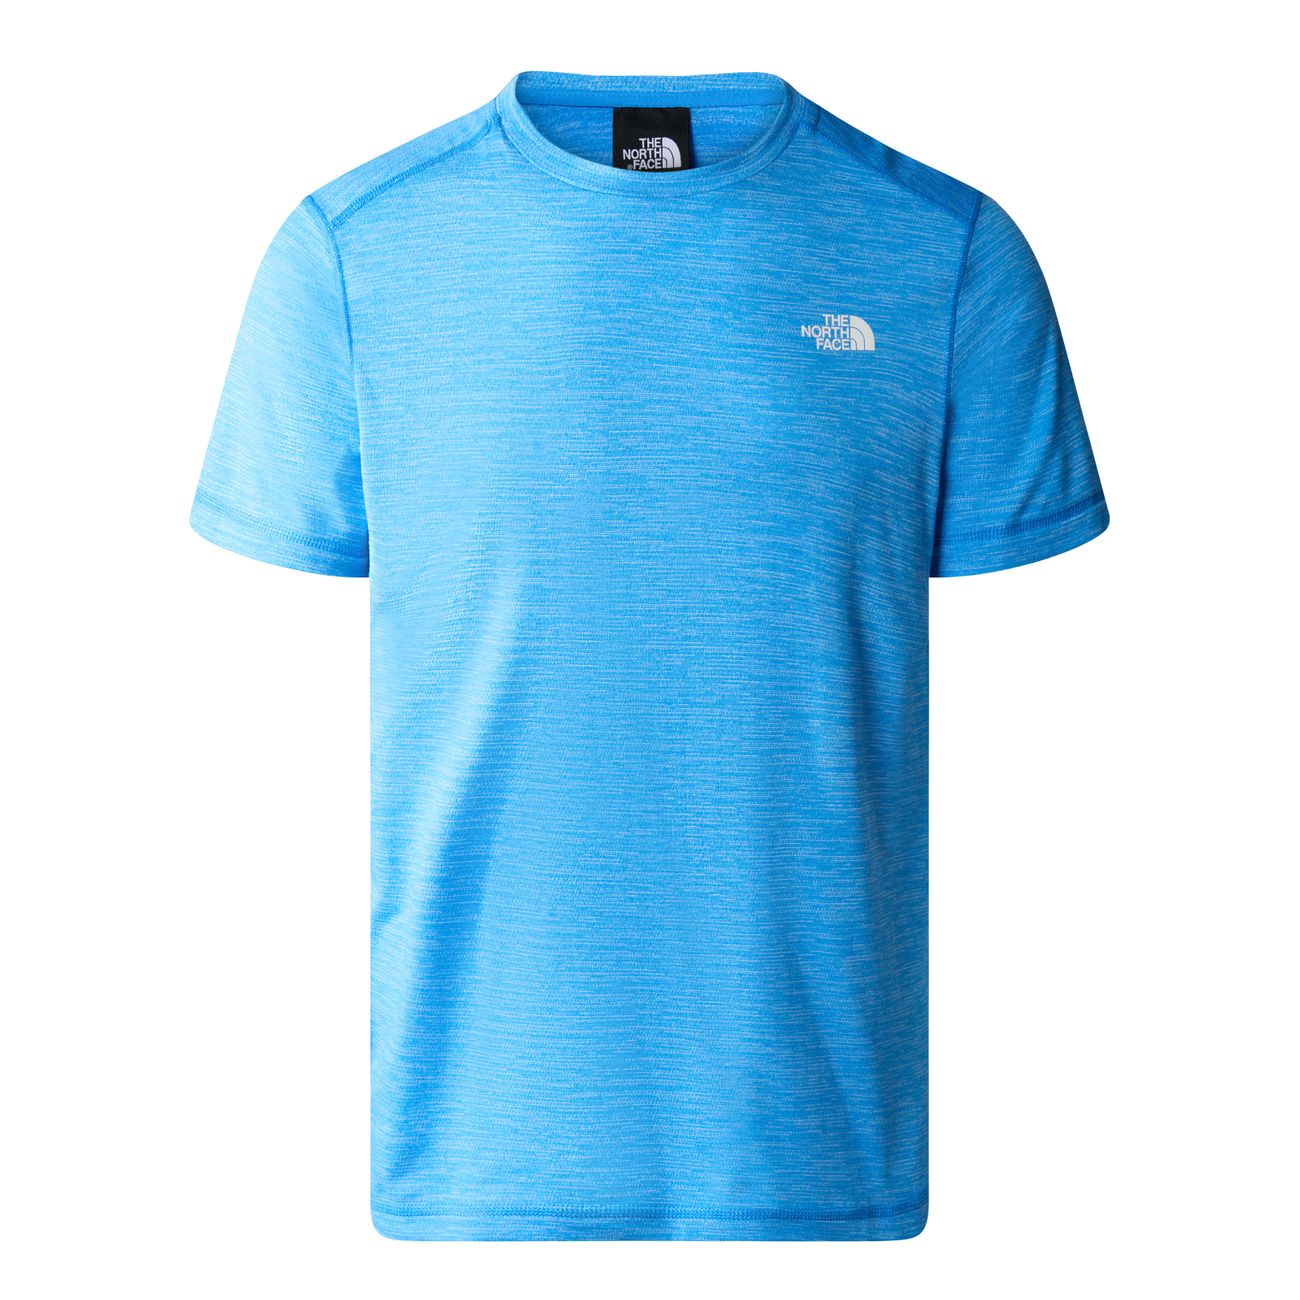 THE NORTH FACE M LIGHTNING S/S TEE Herren T-Shirt - The North Face - SAGATOO - 196013628000